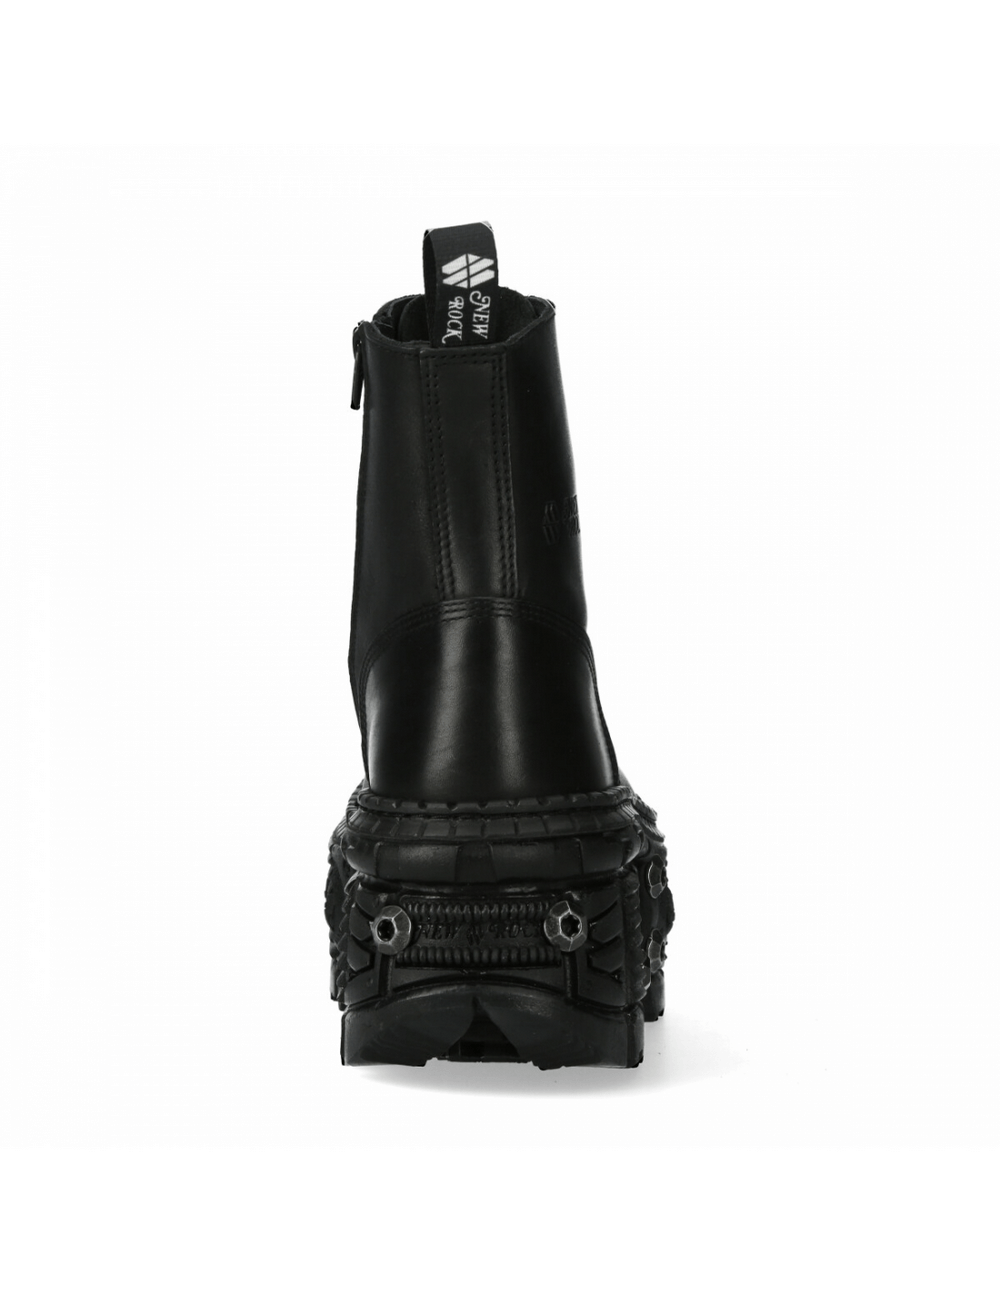 NEW ROCK Black Leather Ankle Platform Boots with Zipper